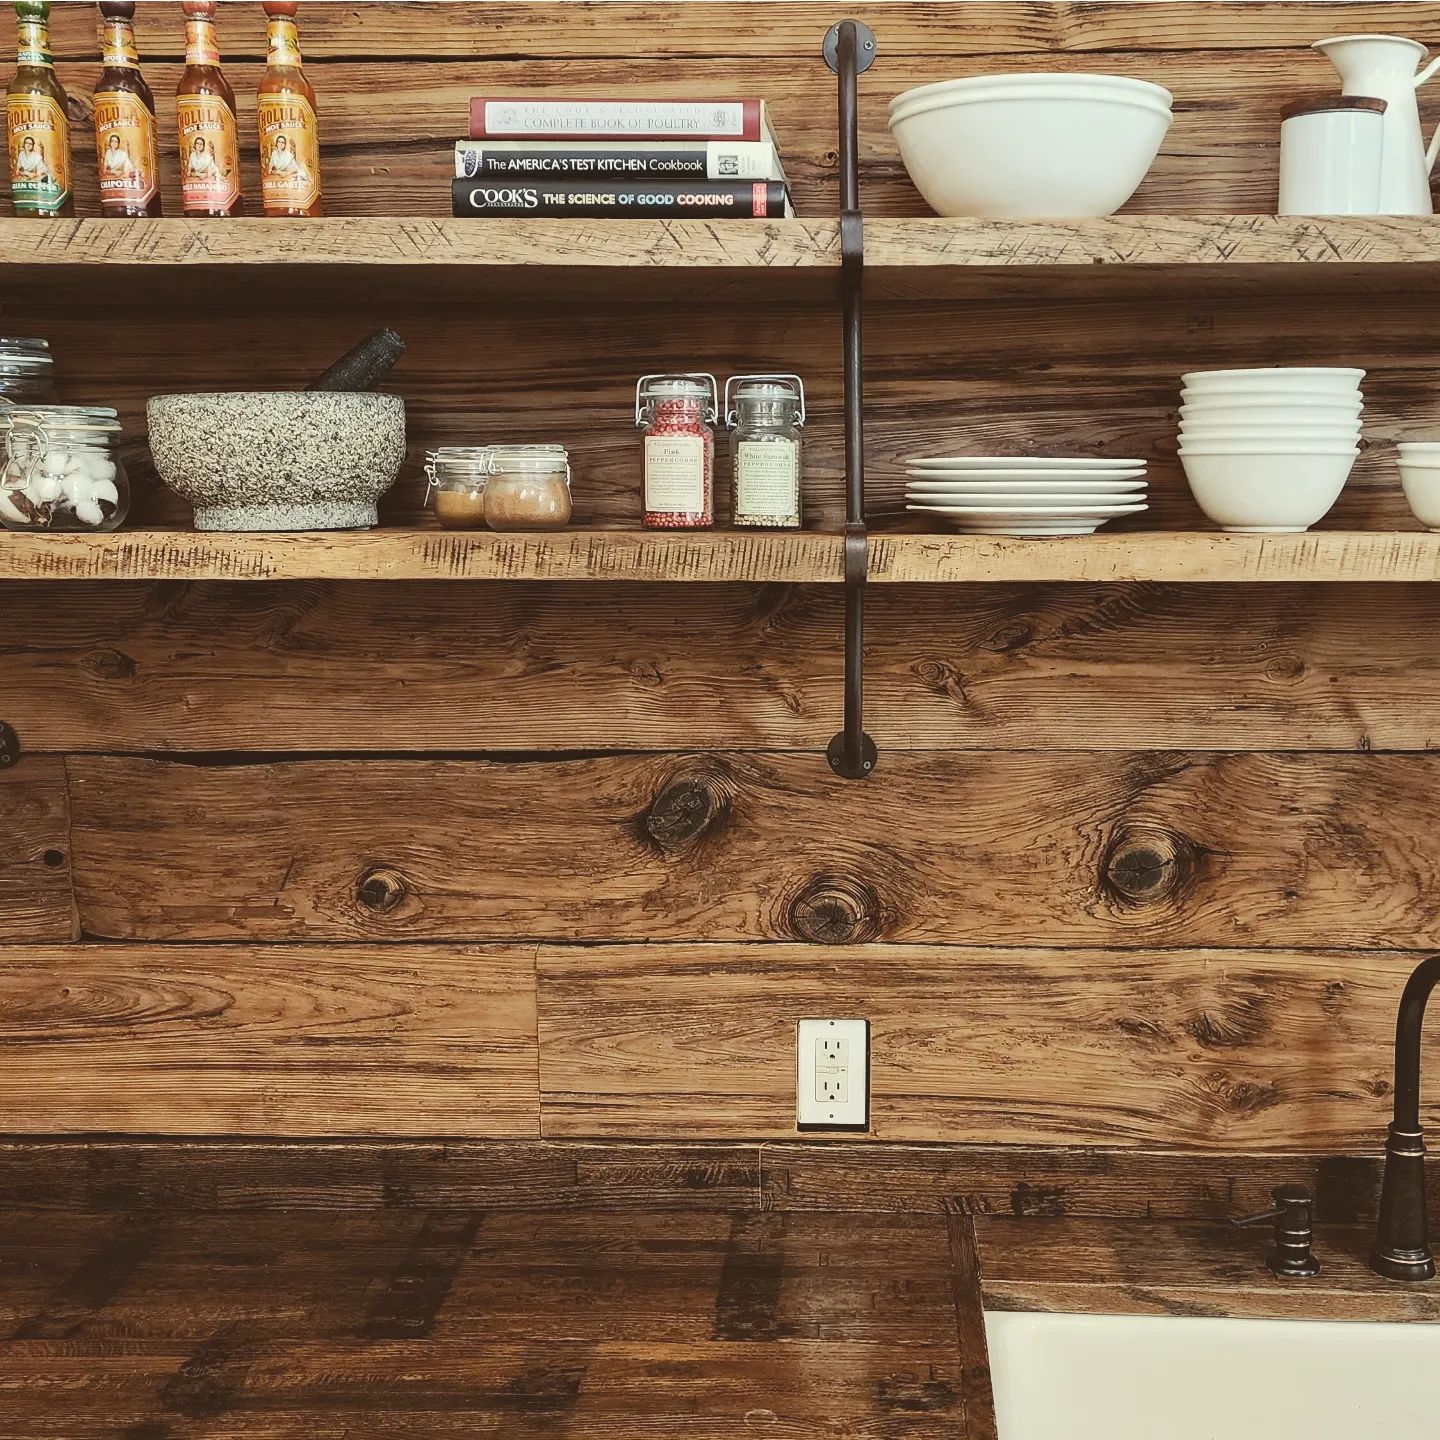 Wooden wall with wooden shelves.